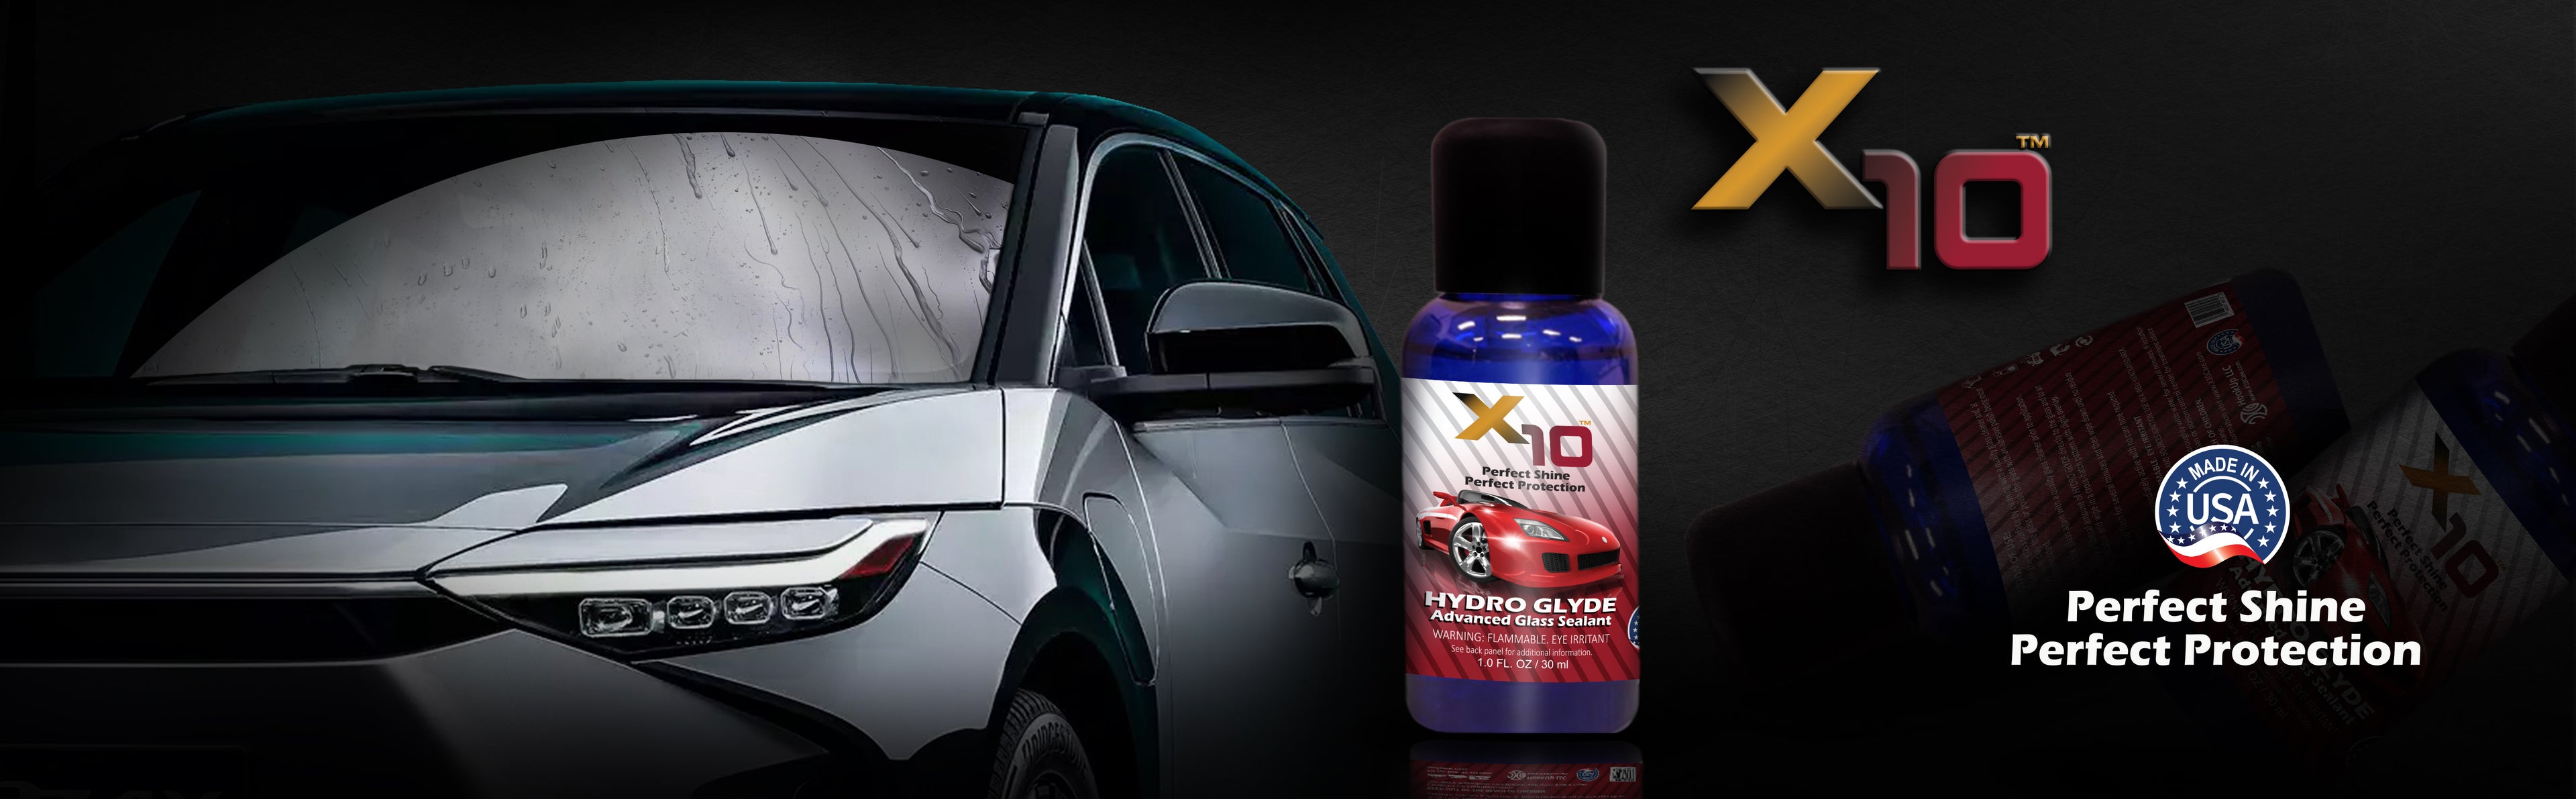 Glass sealant + car care products